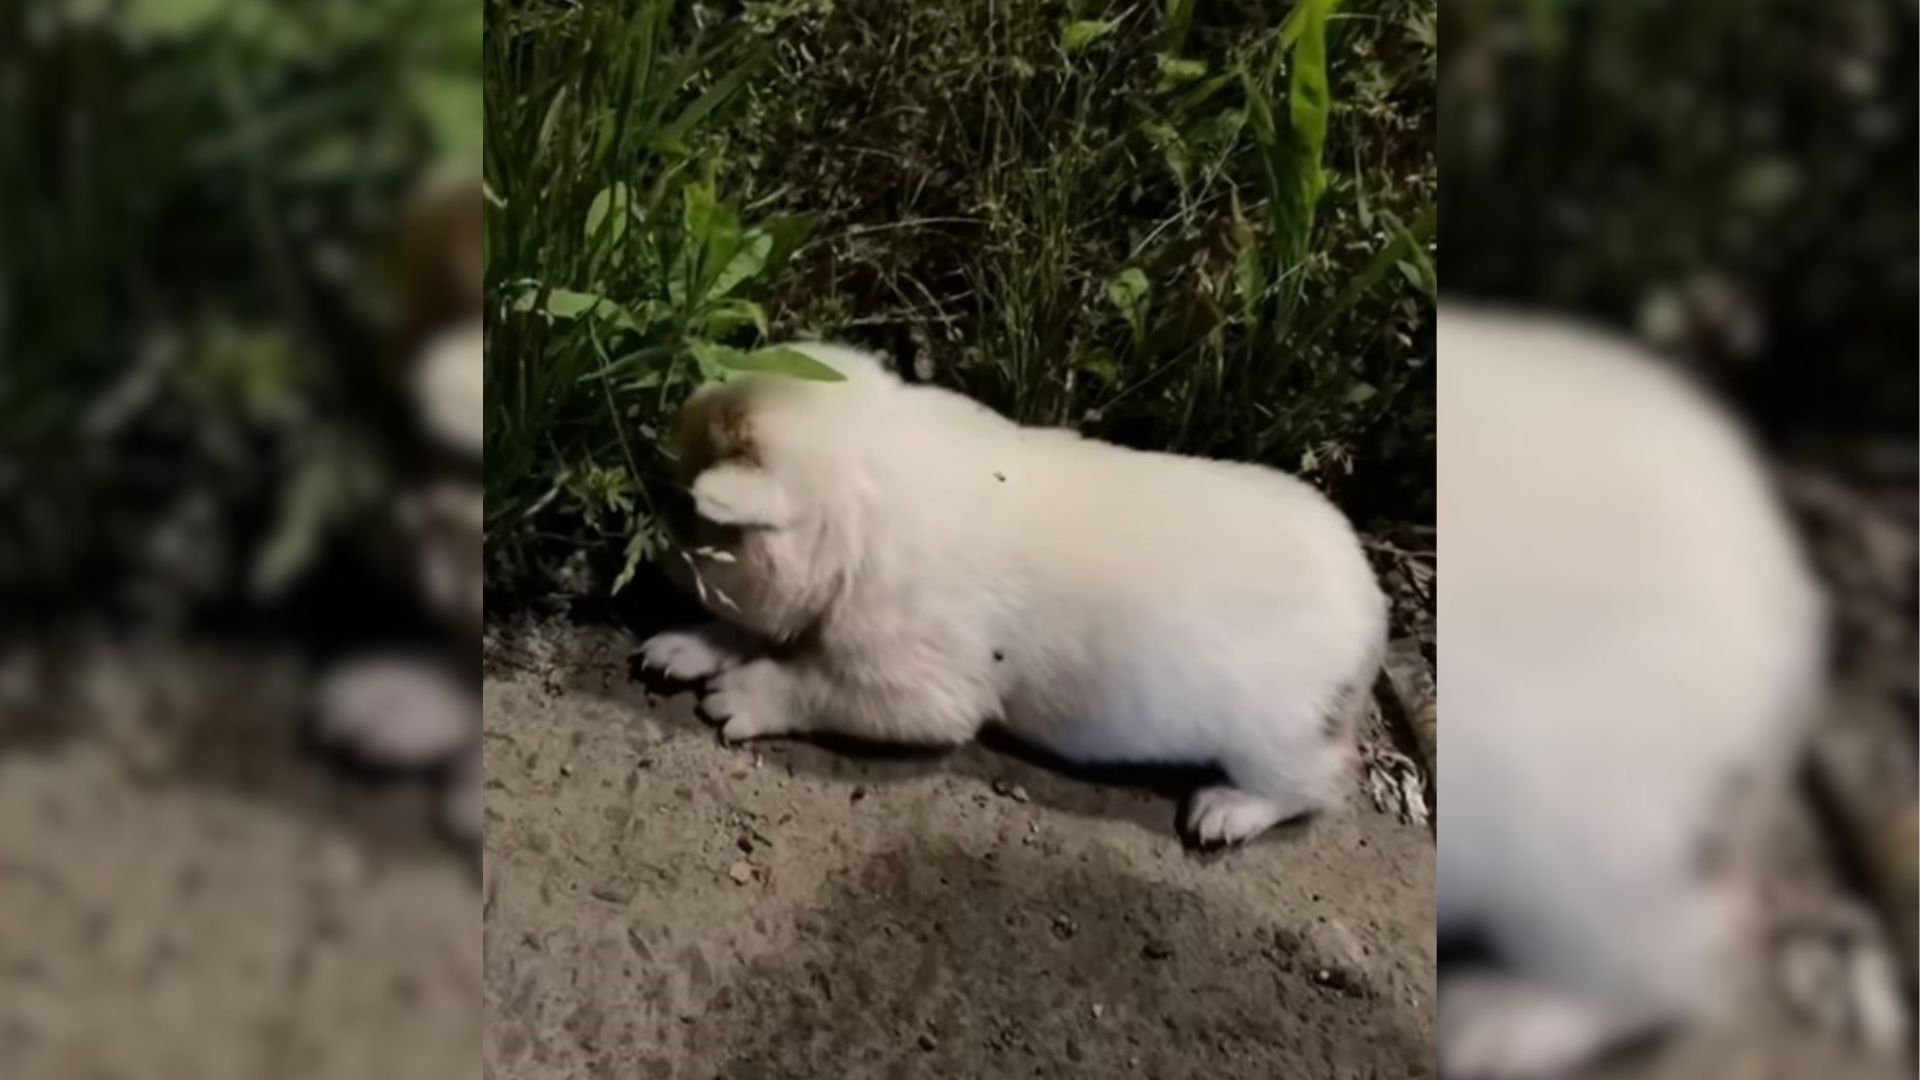 Good Samaritans Saw A Sick And Hungry Puppy Lying At The Park So They Decided To Help